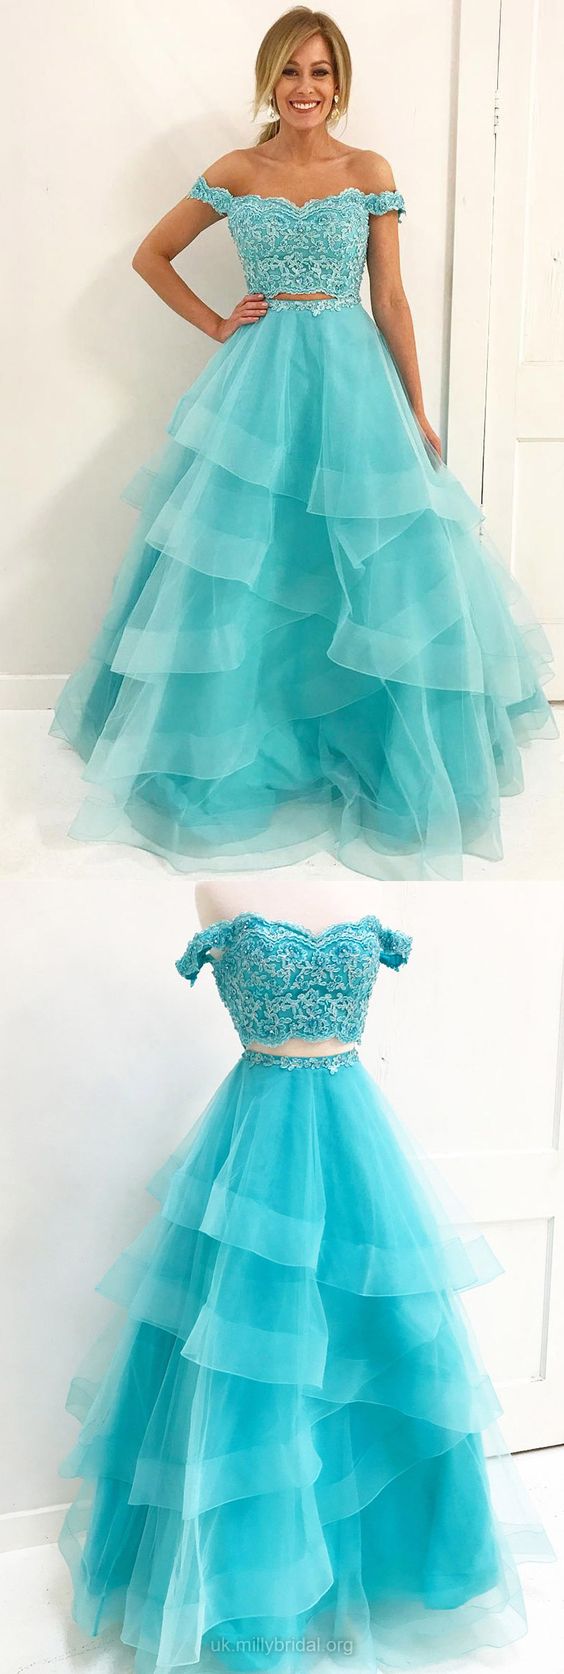 Brilliant Long Blue Evening Dress Featuring Off The Shoulder,2 Piece Prom Dress